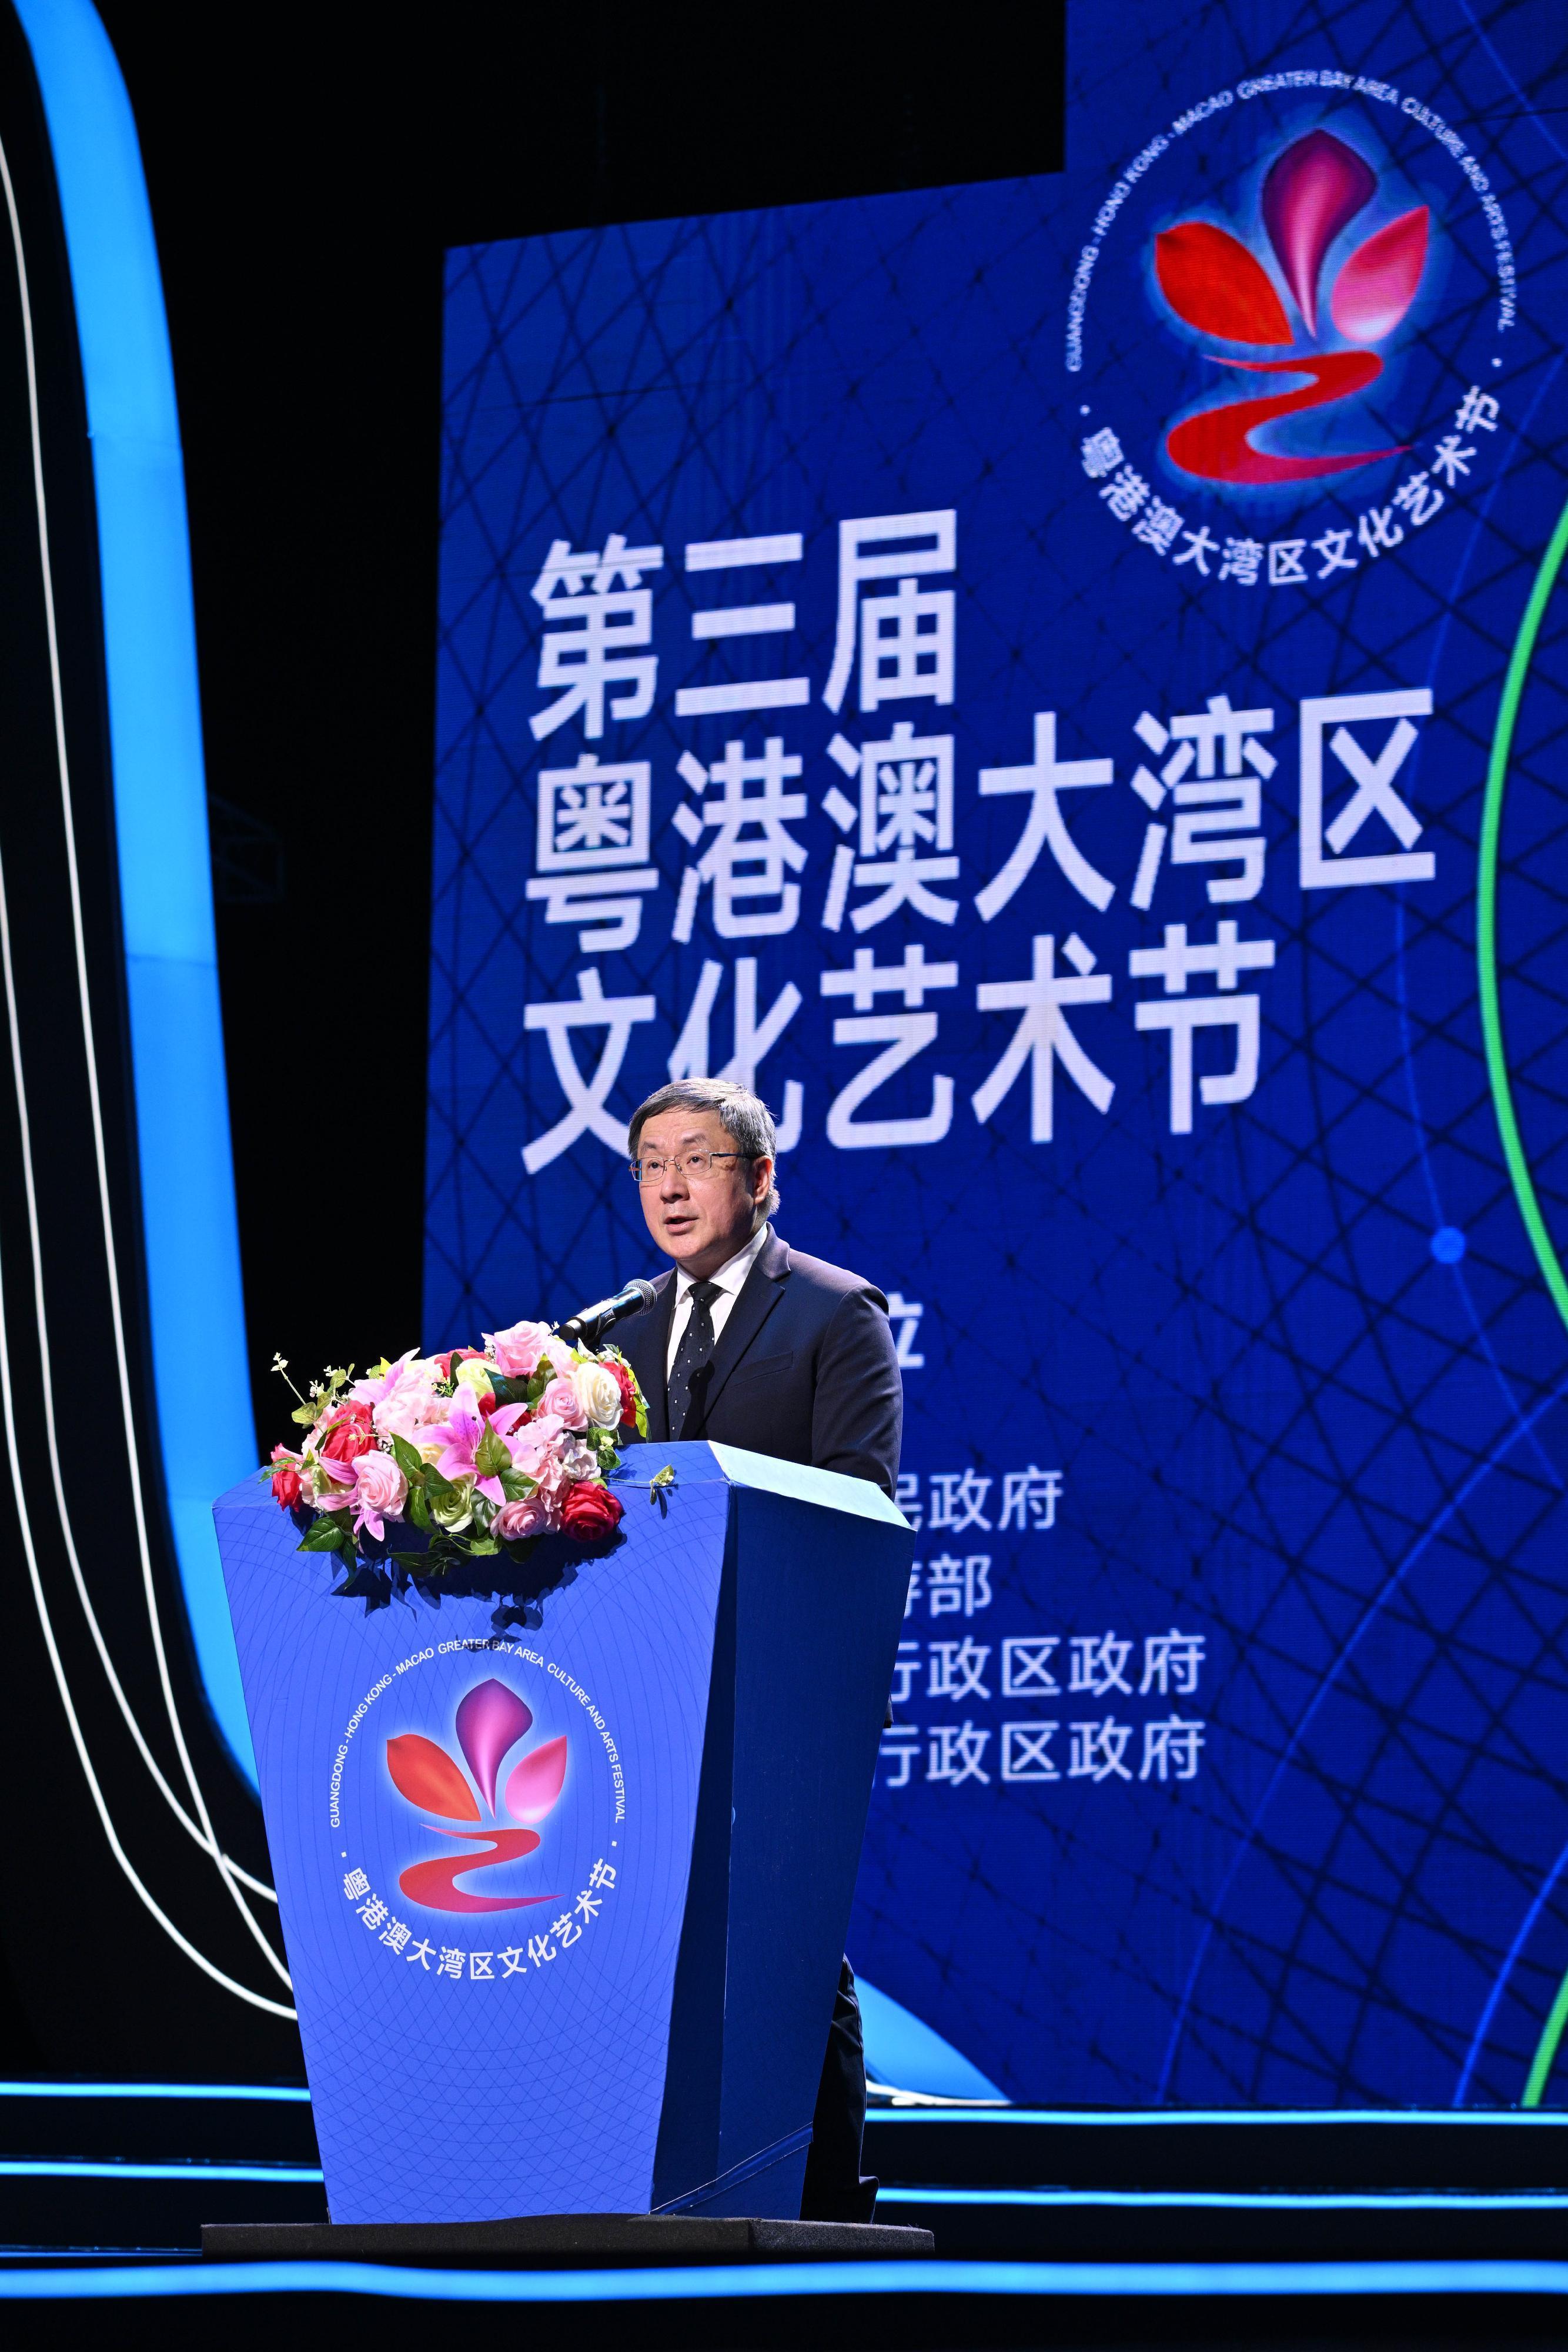 The Deputy Chief Secretary for Administration of the Government of the Hong Kong Special Administrative Region, Mr Cheuk Wing-hing, attended the opening ceremony of the third Guangdong-Hong Kong-Macao Greater Bay Area Culture and Arts Festival last night (September 12) and gave a speech.